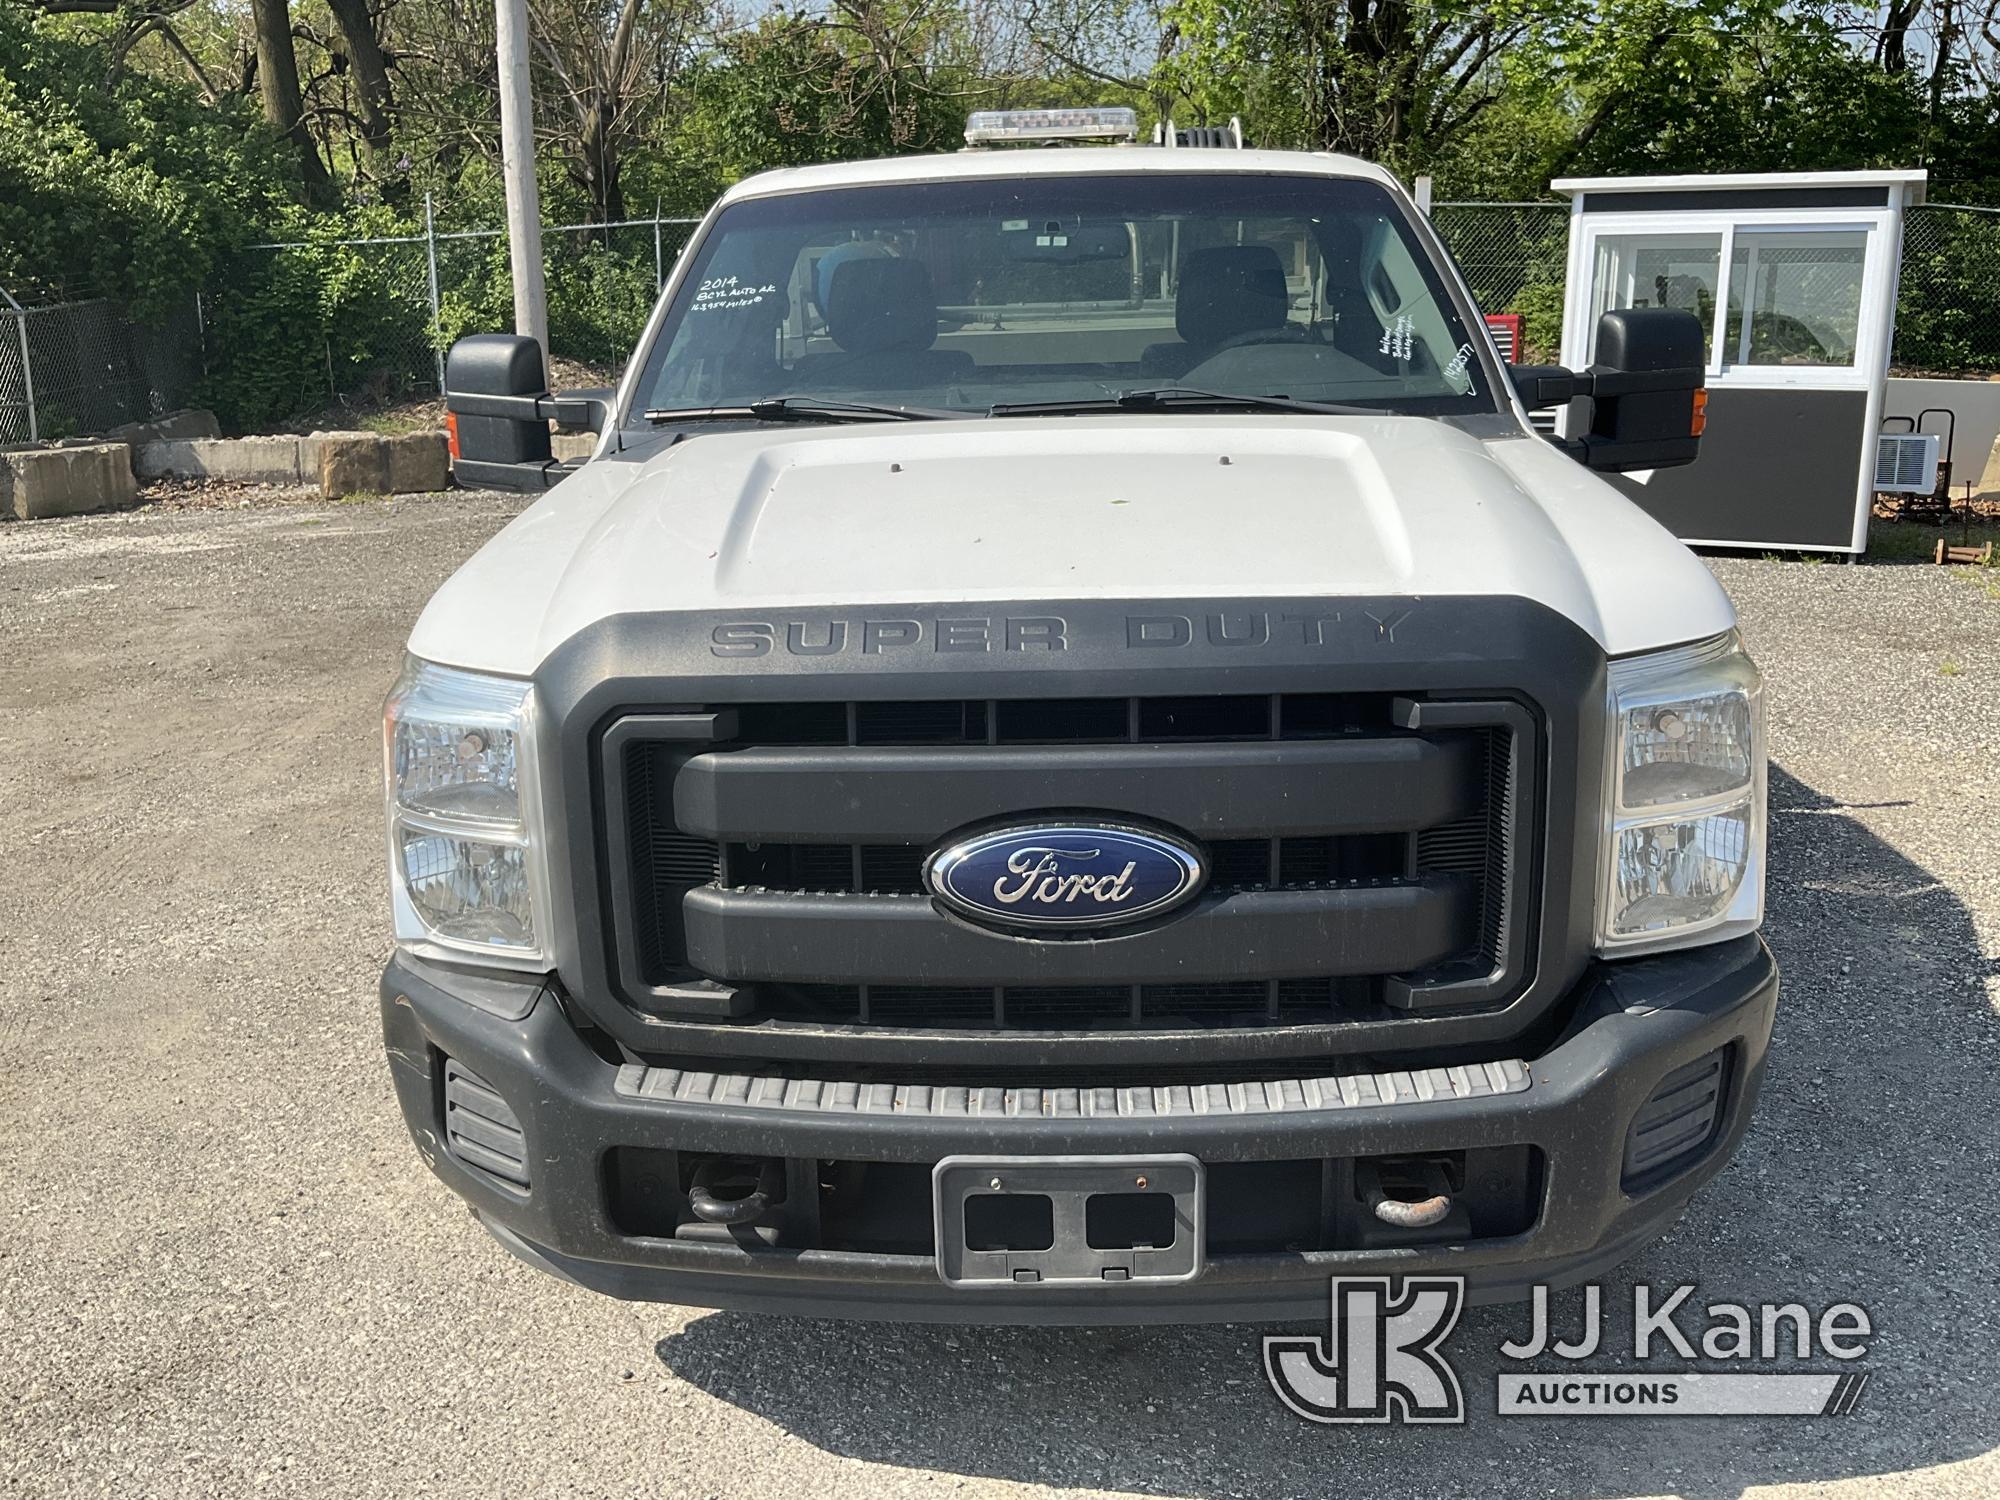 (Plymouth Meeting, PA) 2014 Ford F350 Service Truck Runs & Moves, Check Engine Light On, Body & Rust